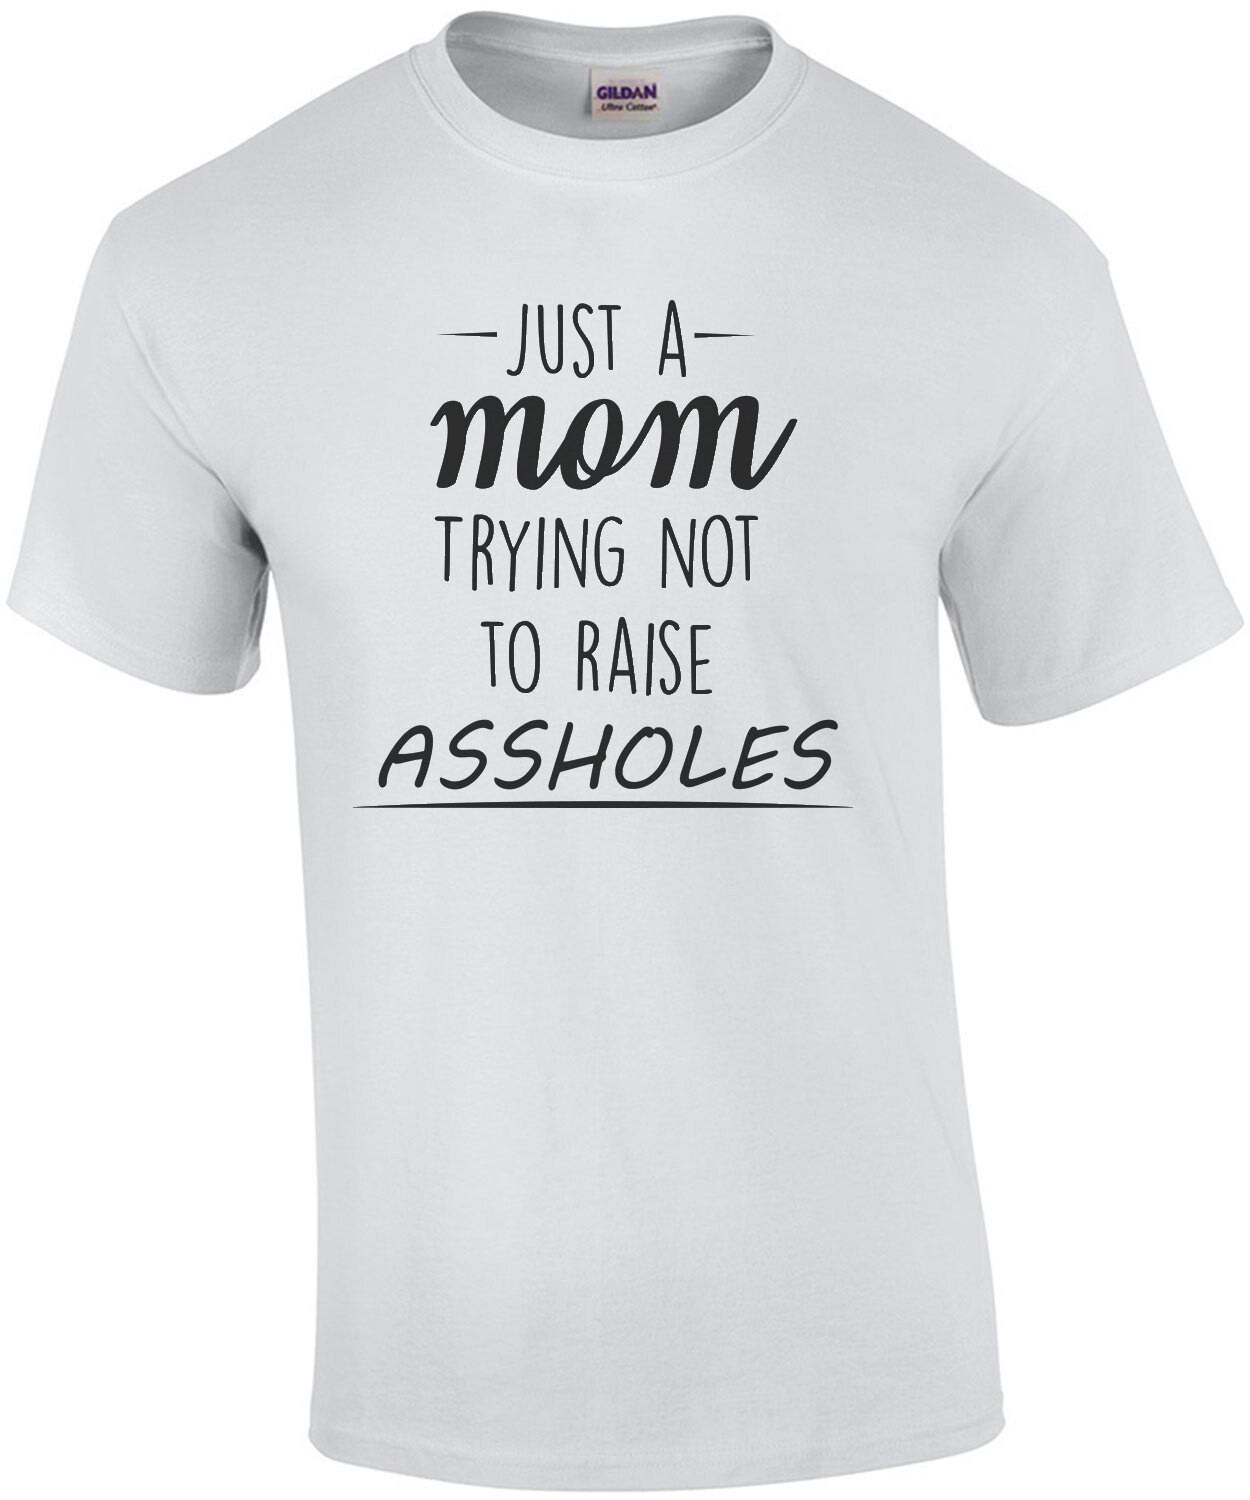 Just a mom trying not to raise assholes - funny mom t-shirt